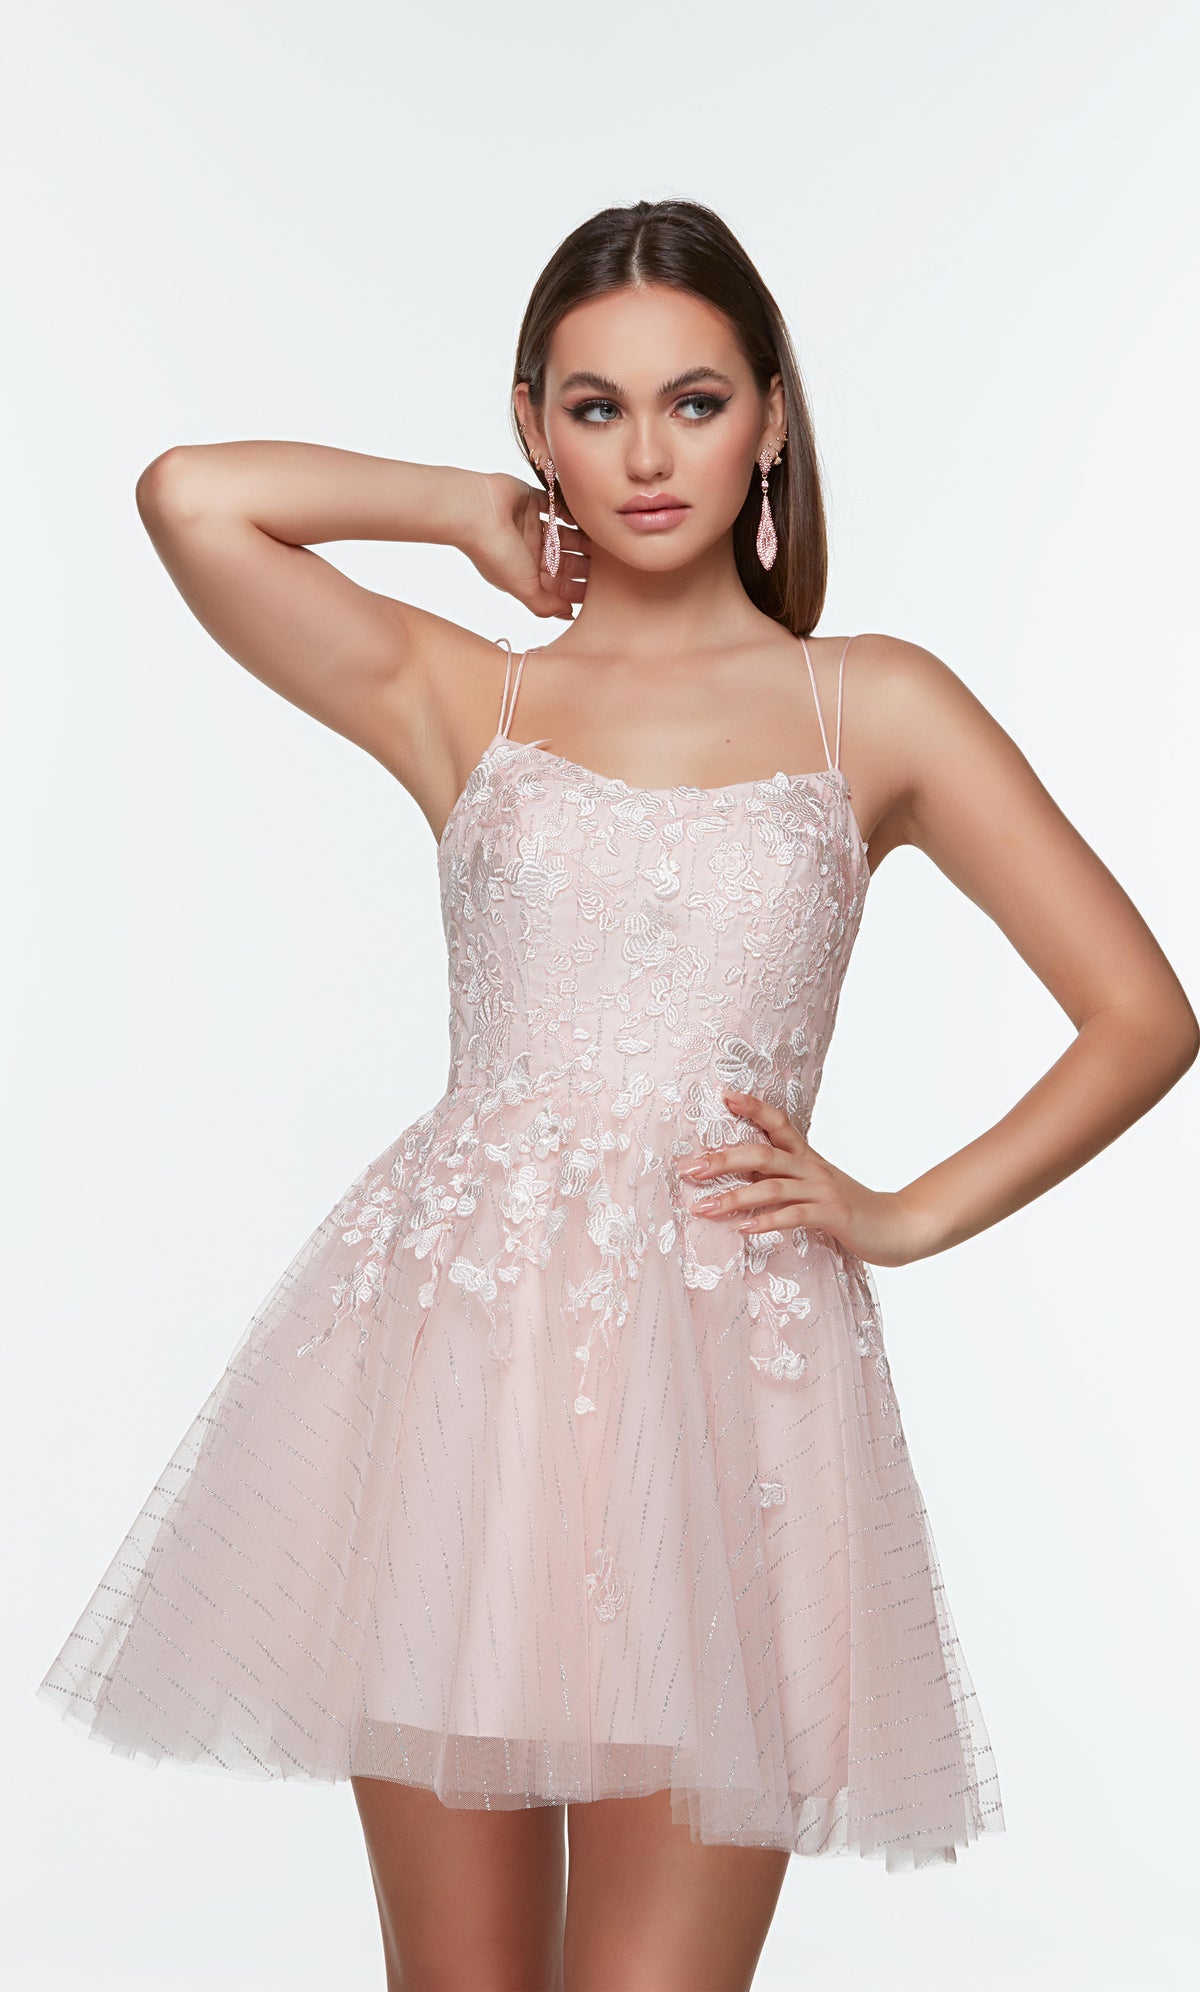 Light pink short party dress with a sweetheart neckline, floral lace appliques, and pockets.